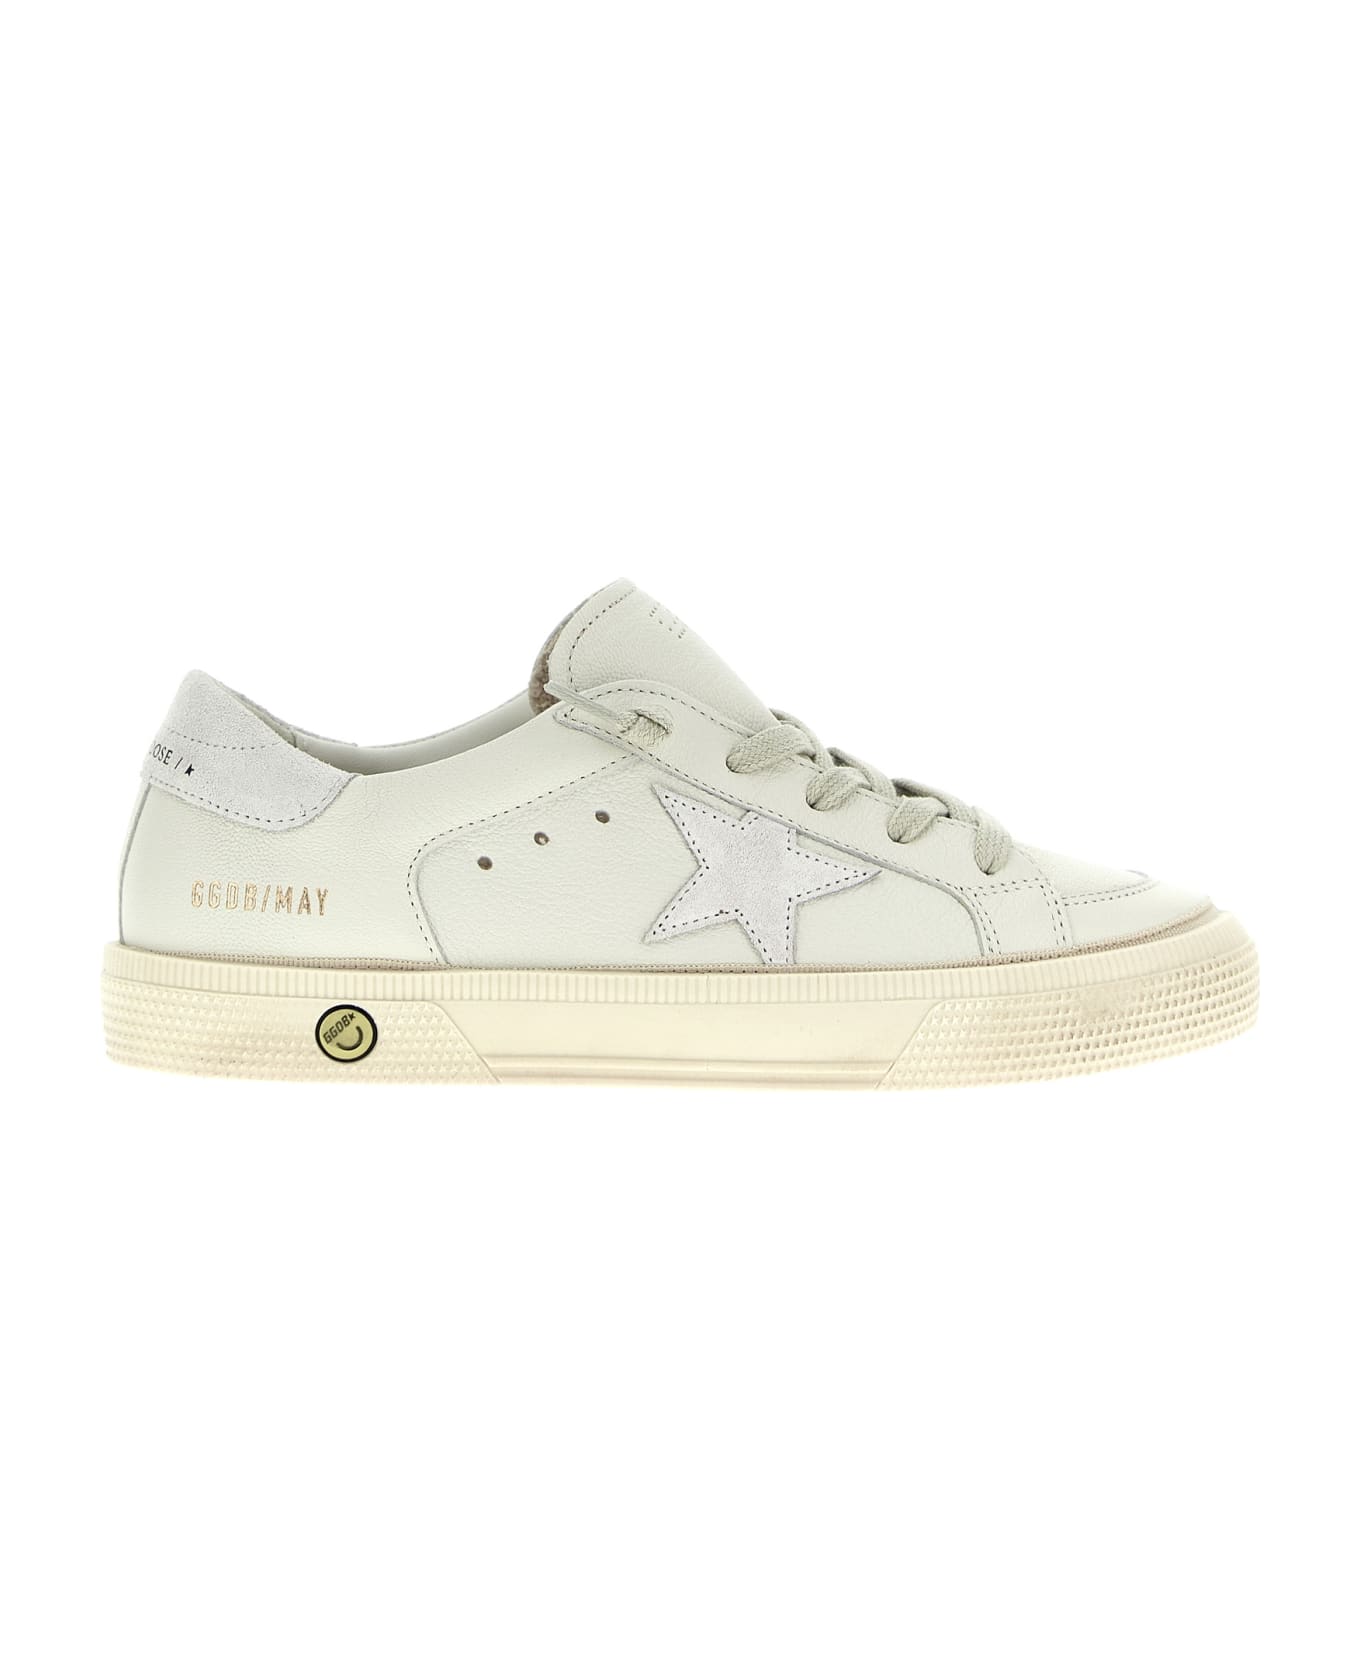 Golden Goose 'may' Sneakers - Optic White